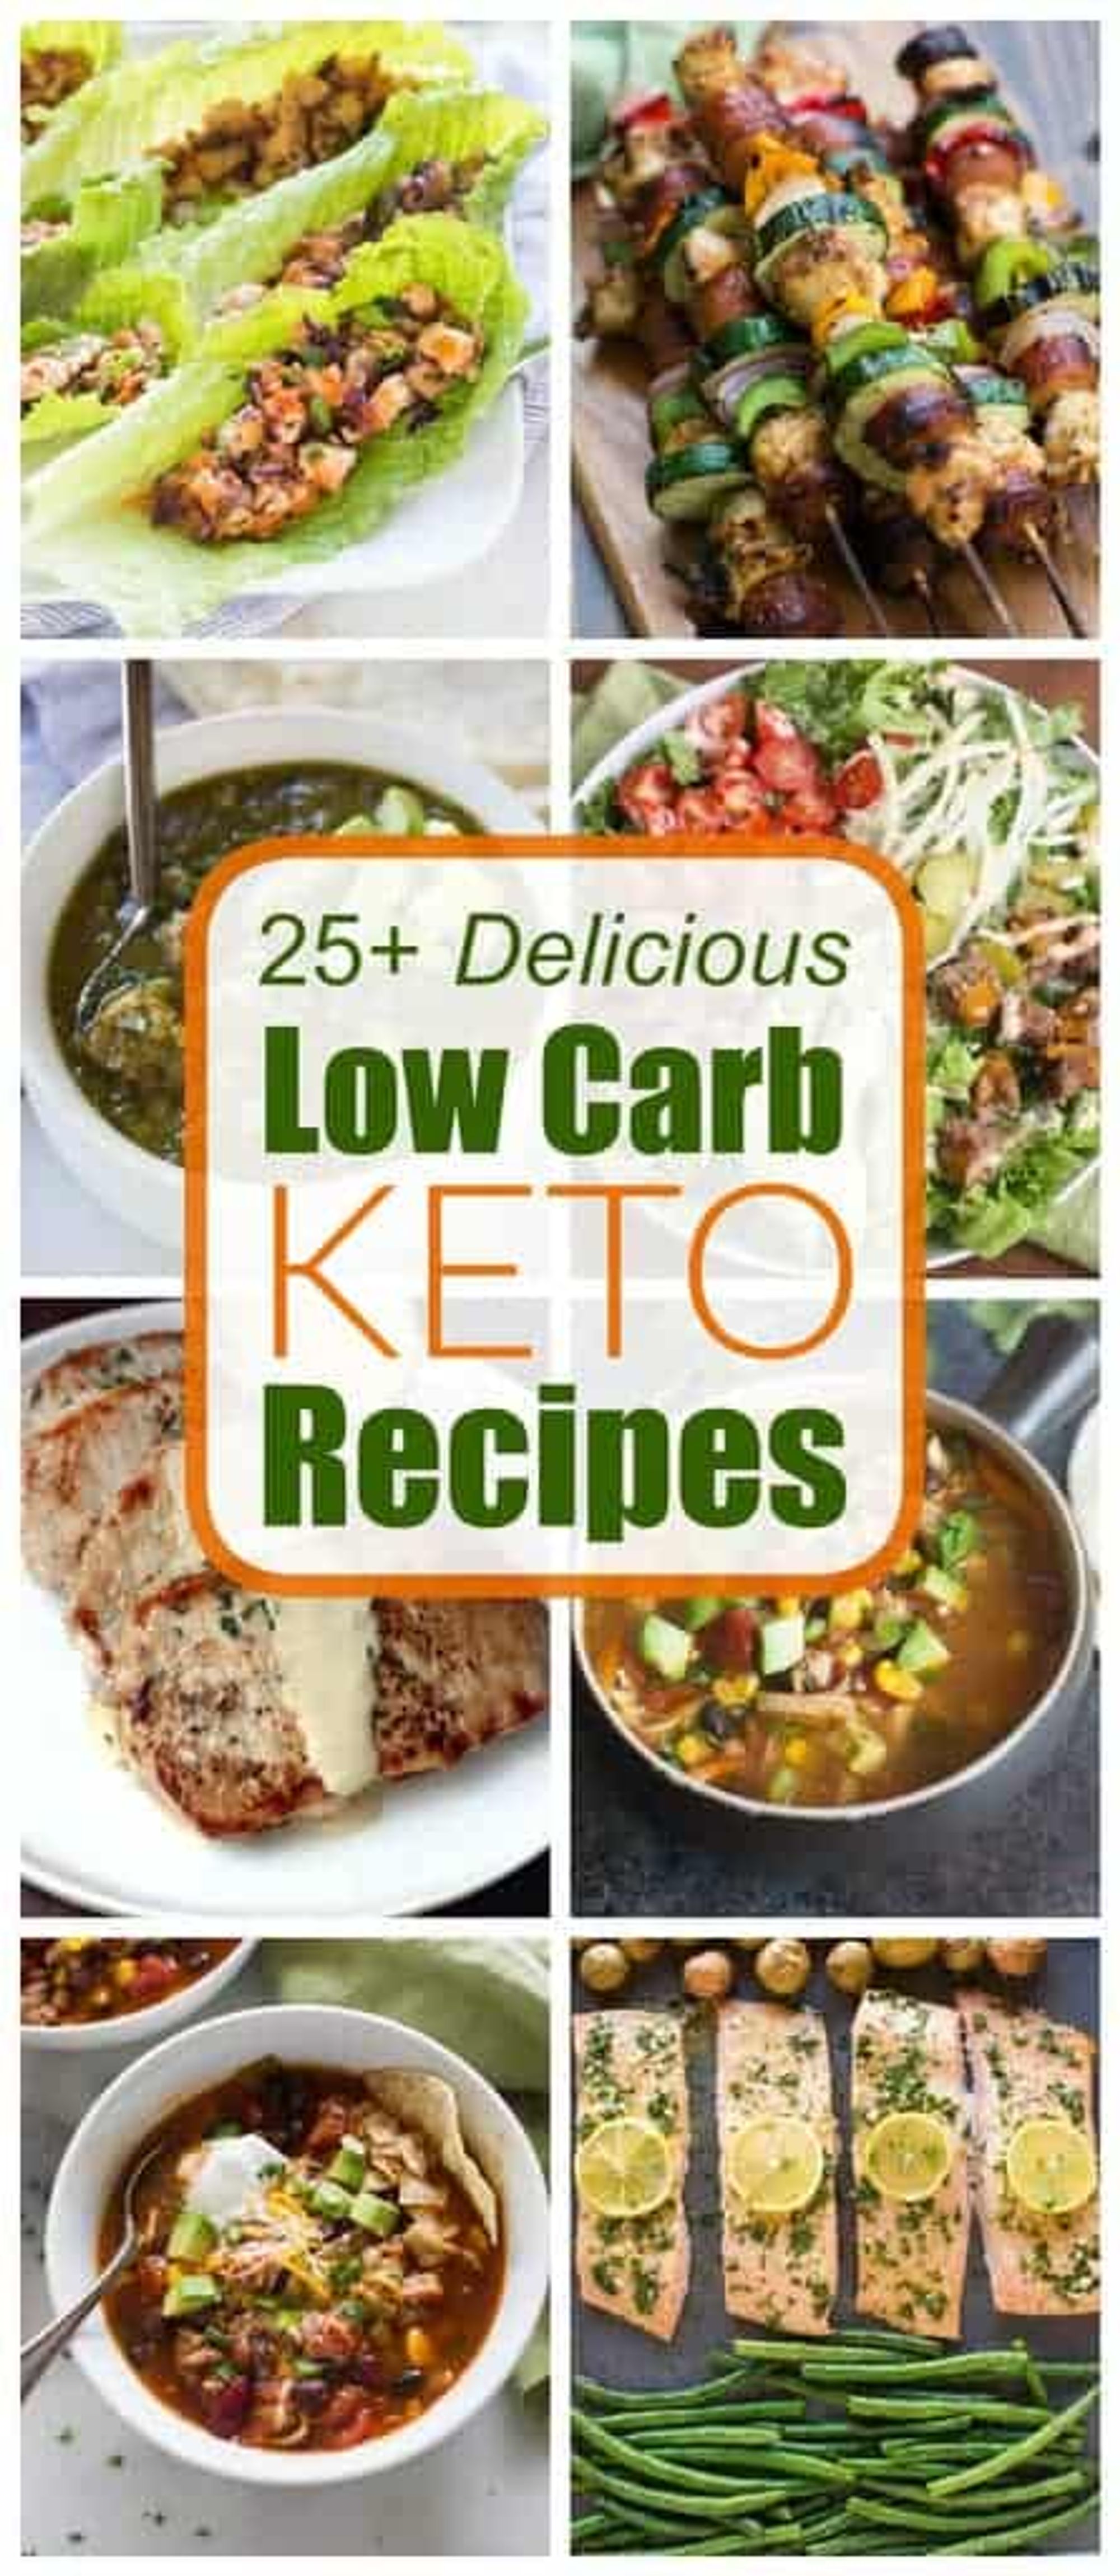 Low Carb Keto Recipes | - Tastes Better From Scratch - My Recipe Magic